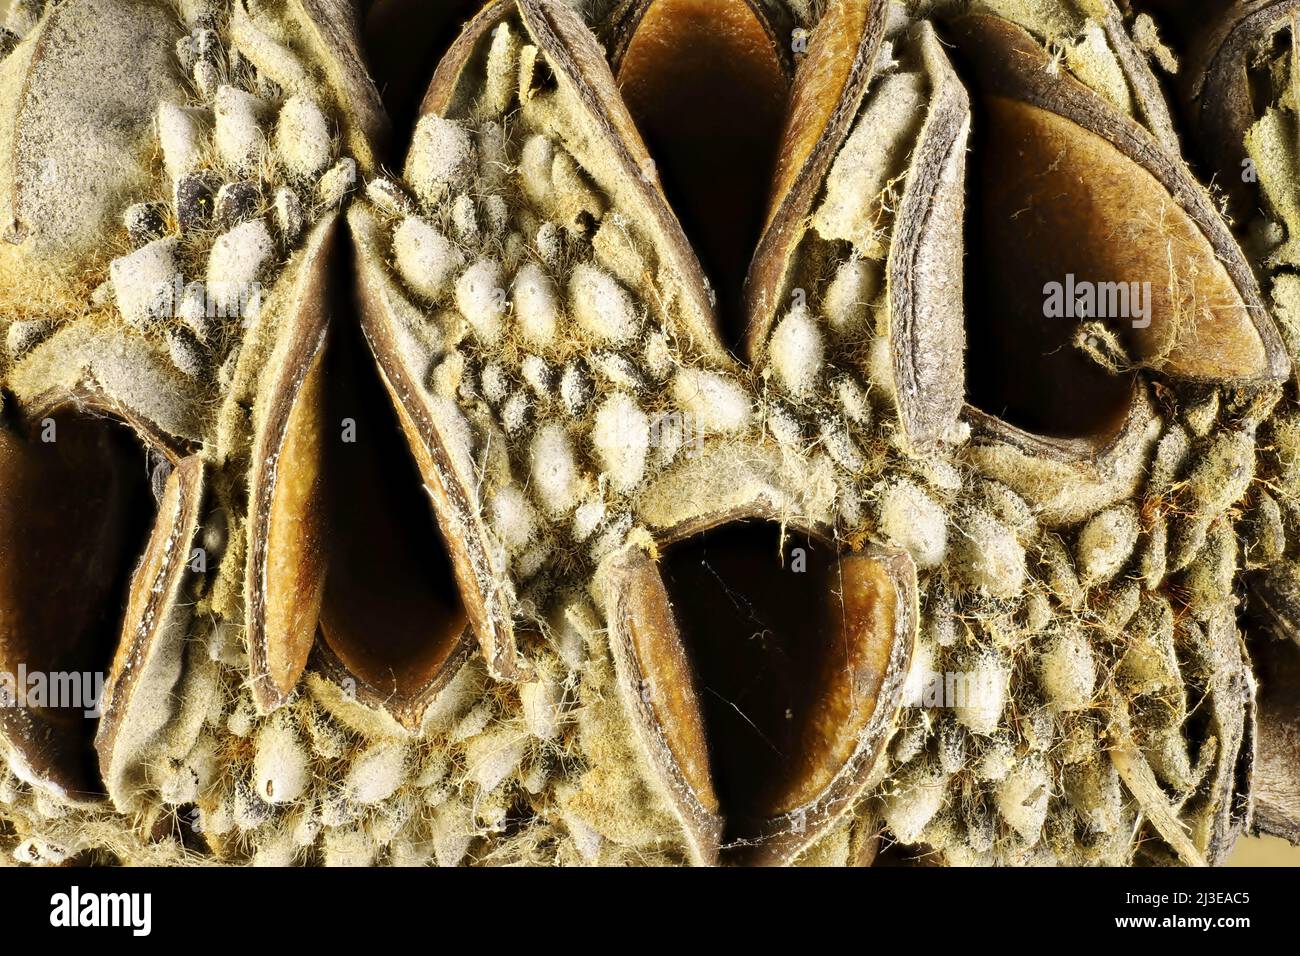 Magnified view of Acorn Banksia (Banksia prionotes) fruit follicles and valves. Stock Photo